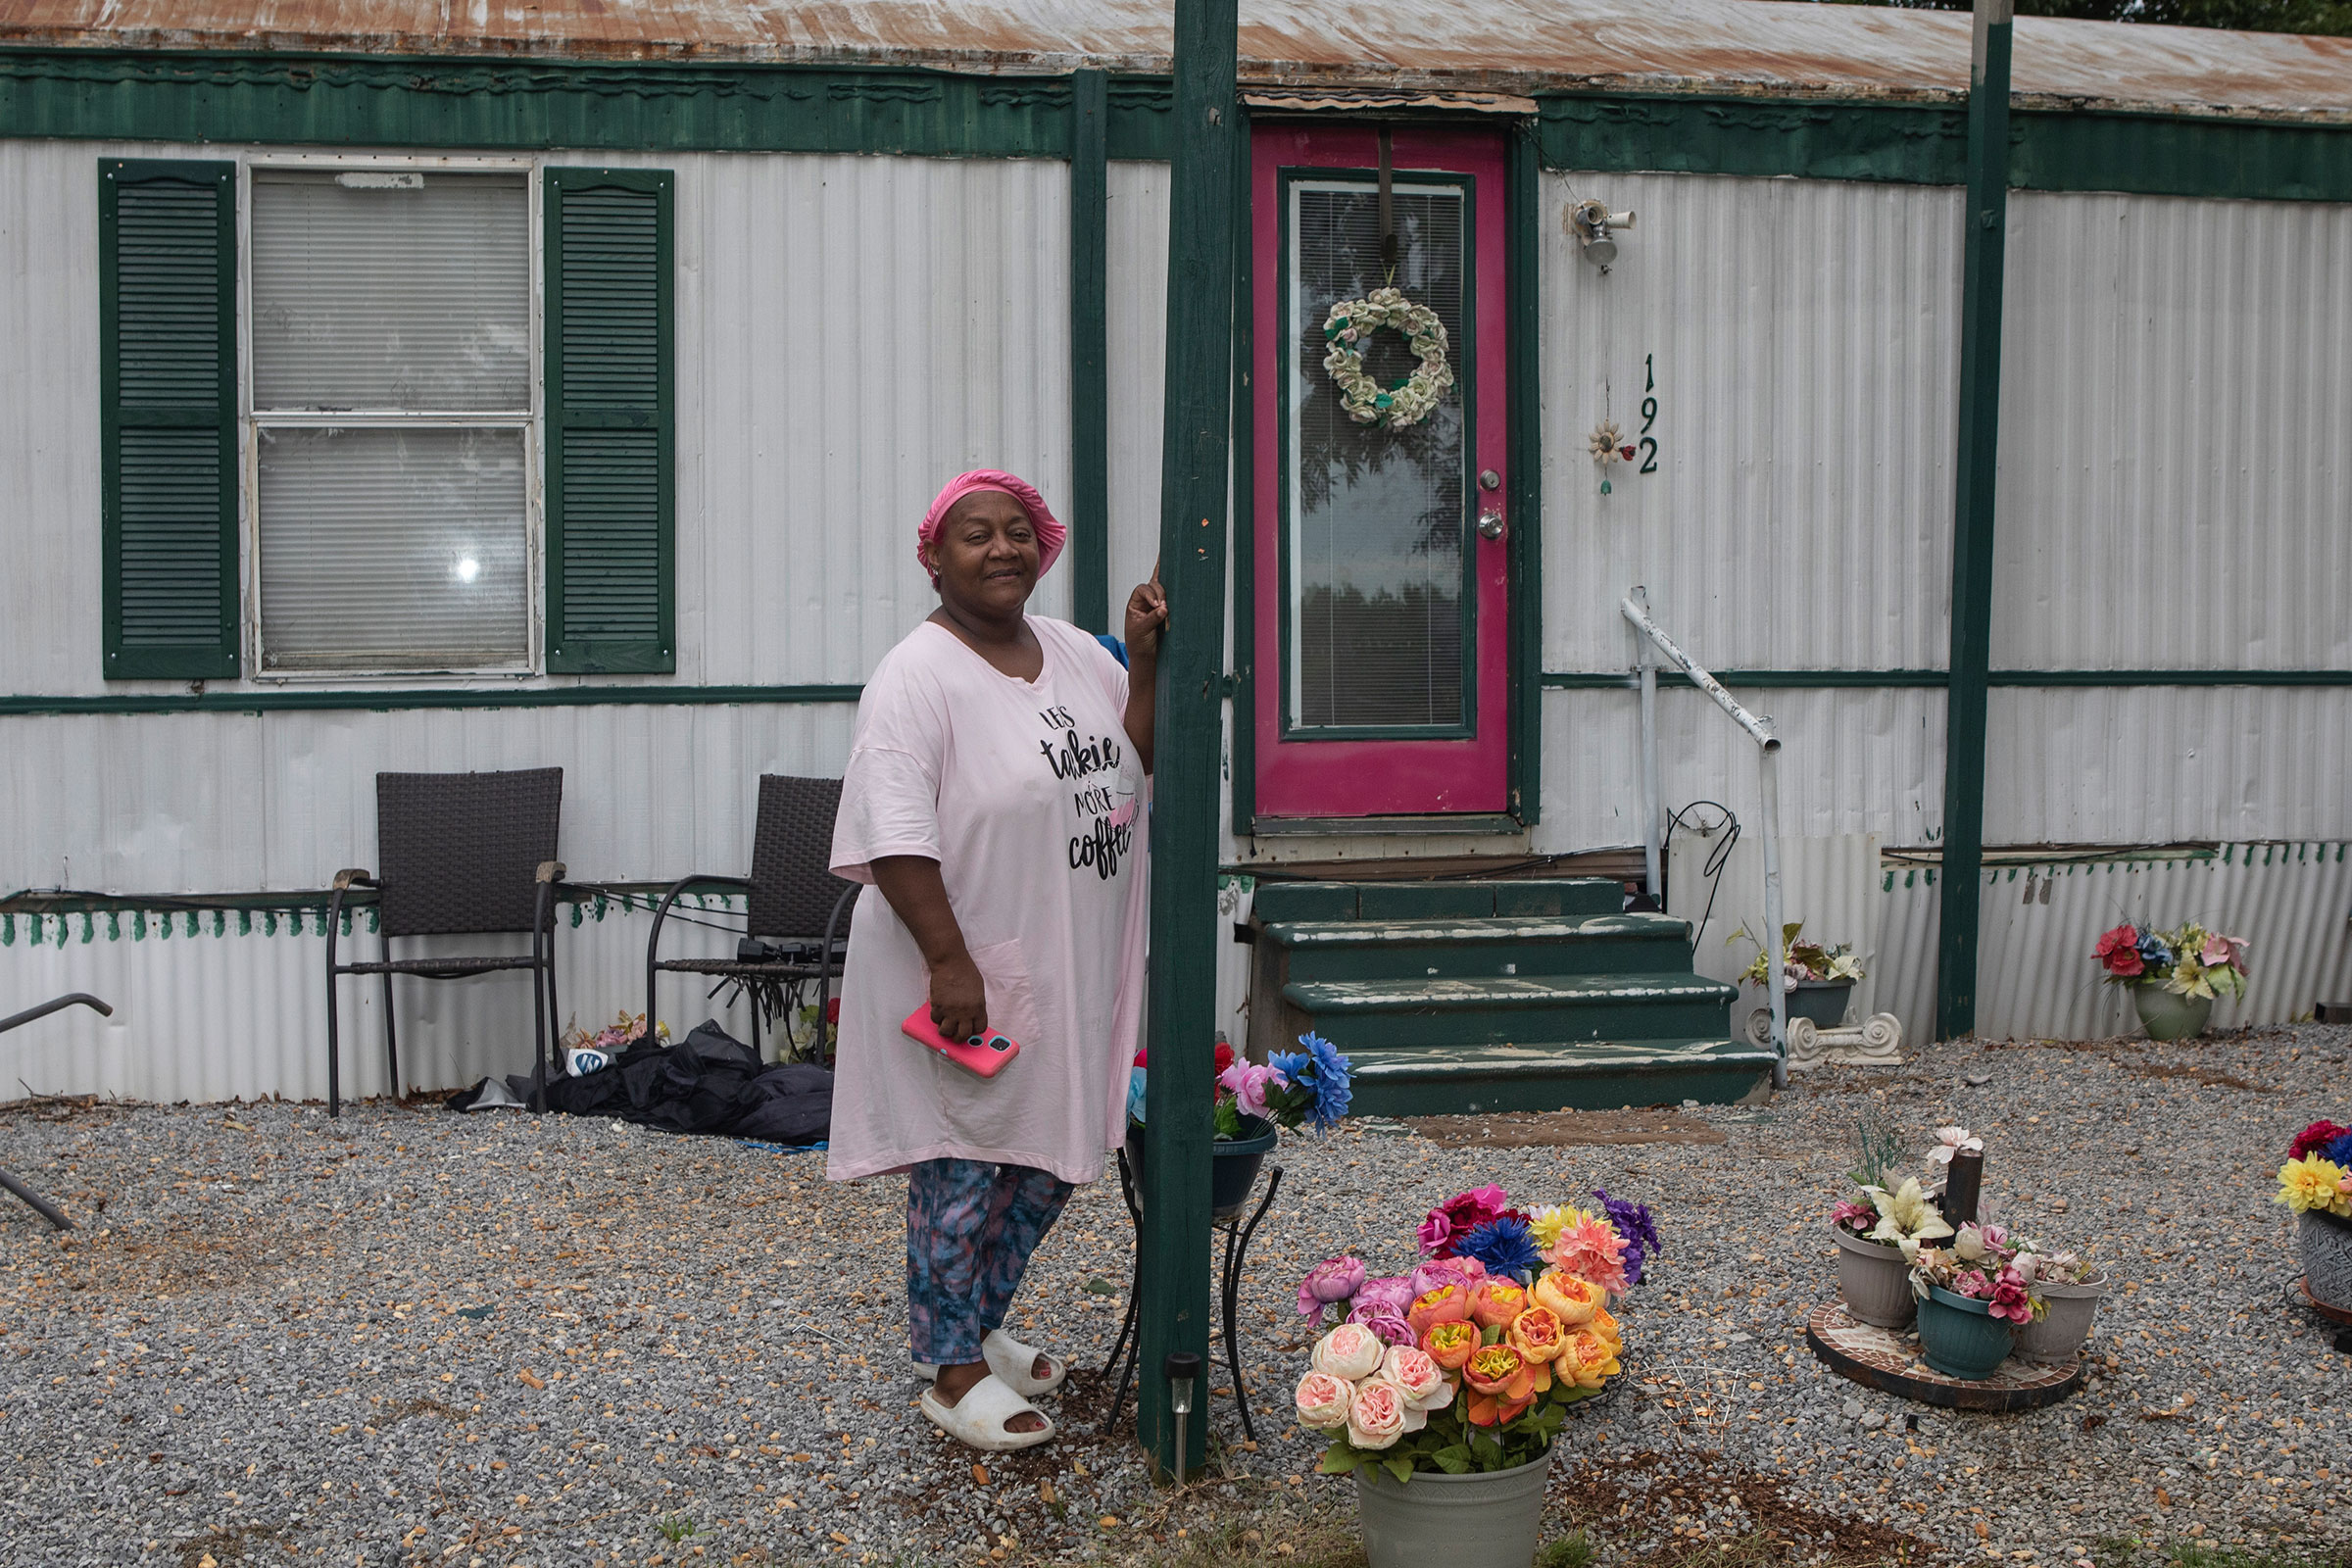 Gladys Grant stands in front of her home in Lowndes County Alabama on August 1st, 2022. Gladys and her family have been residents of Lowndes County for many generations.